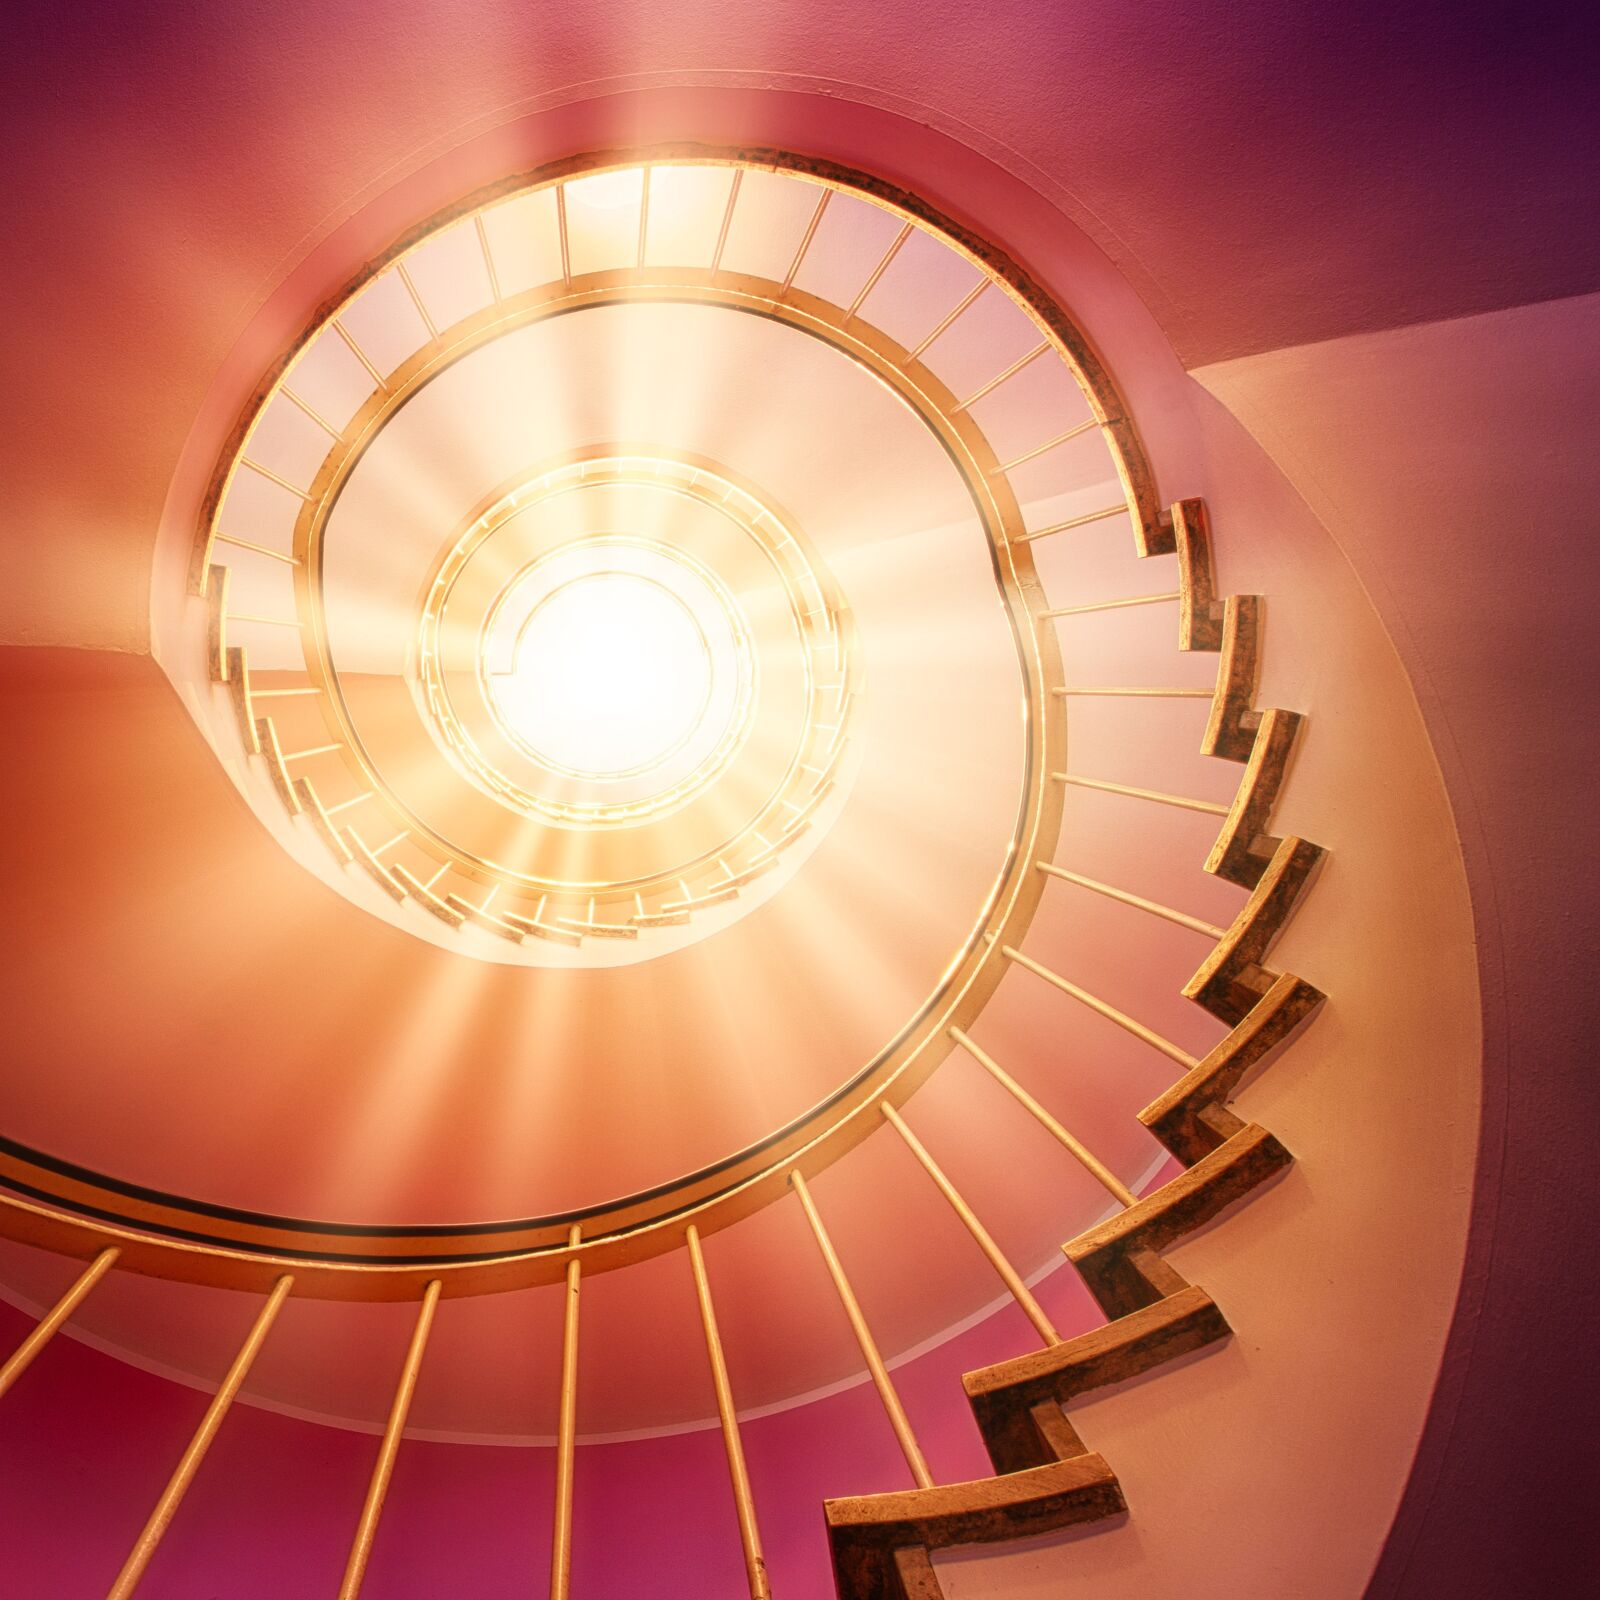 Sony a7 sample photo. Spiral staircase, light, spiral photography